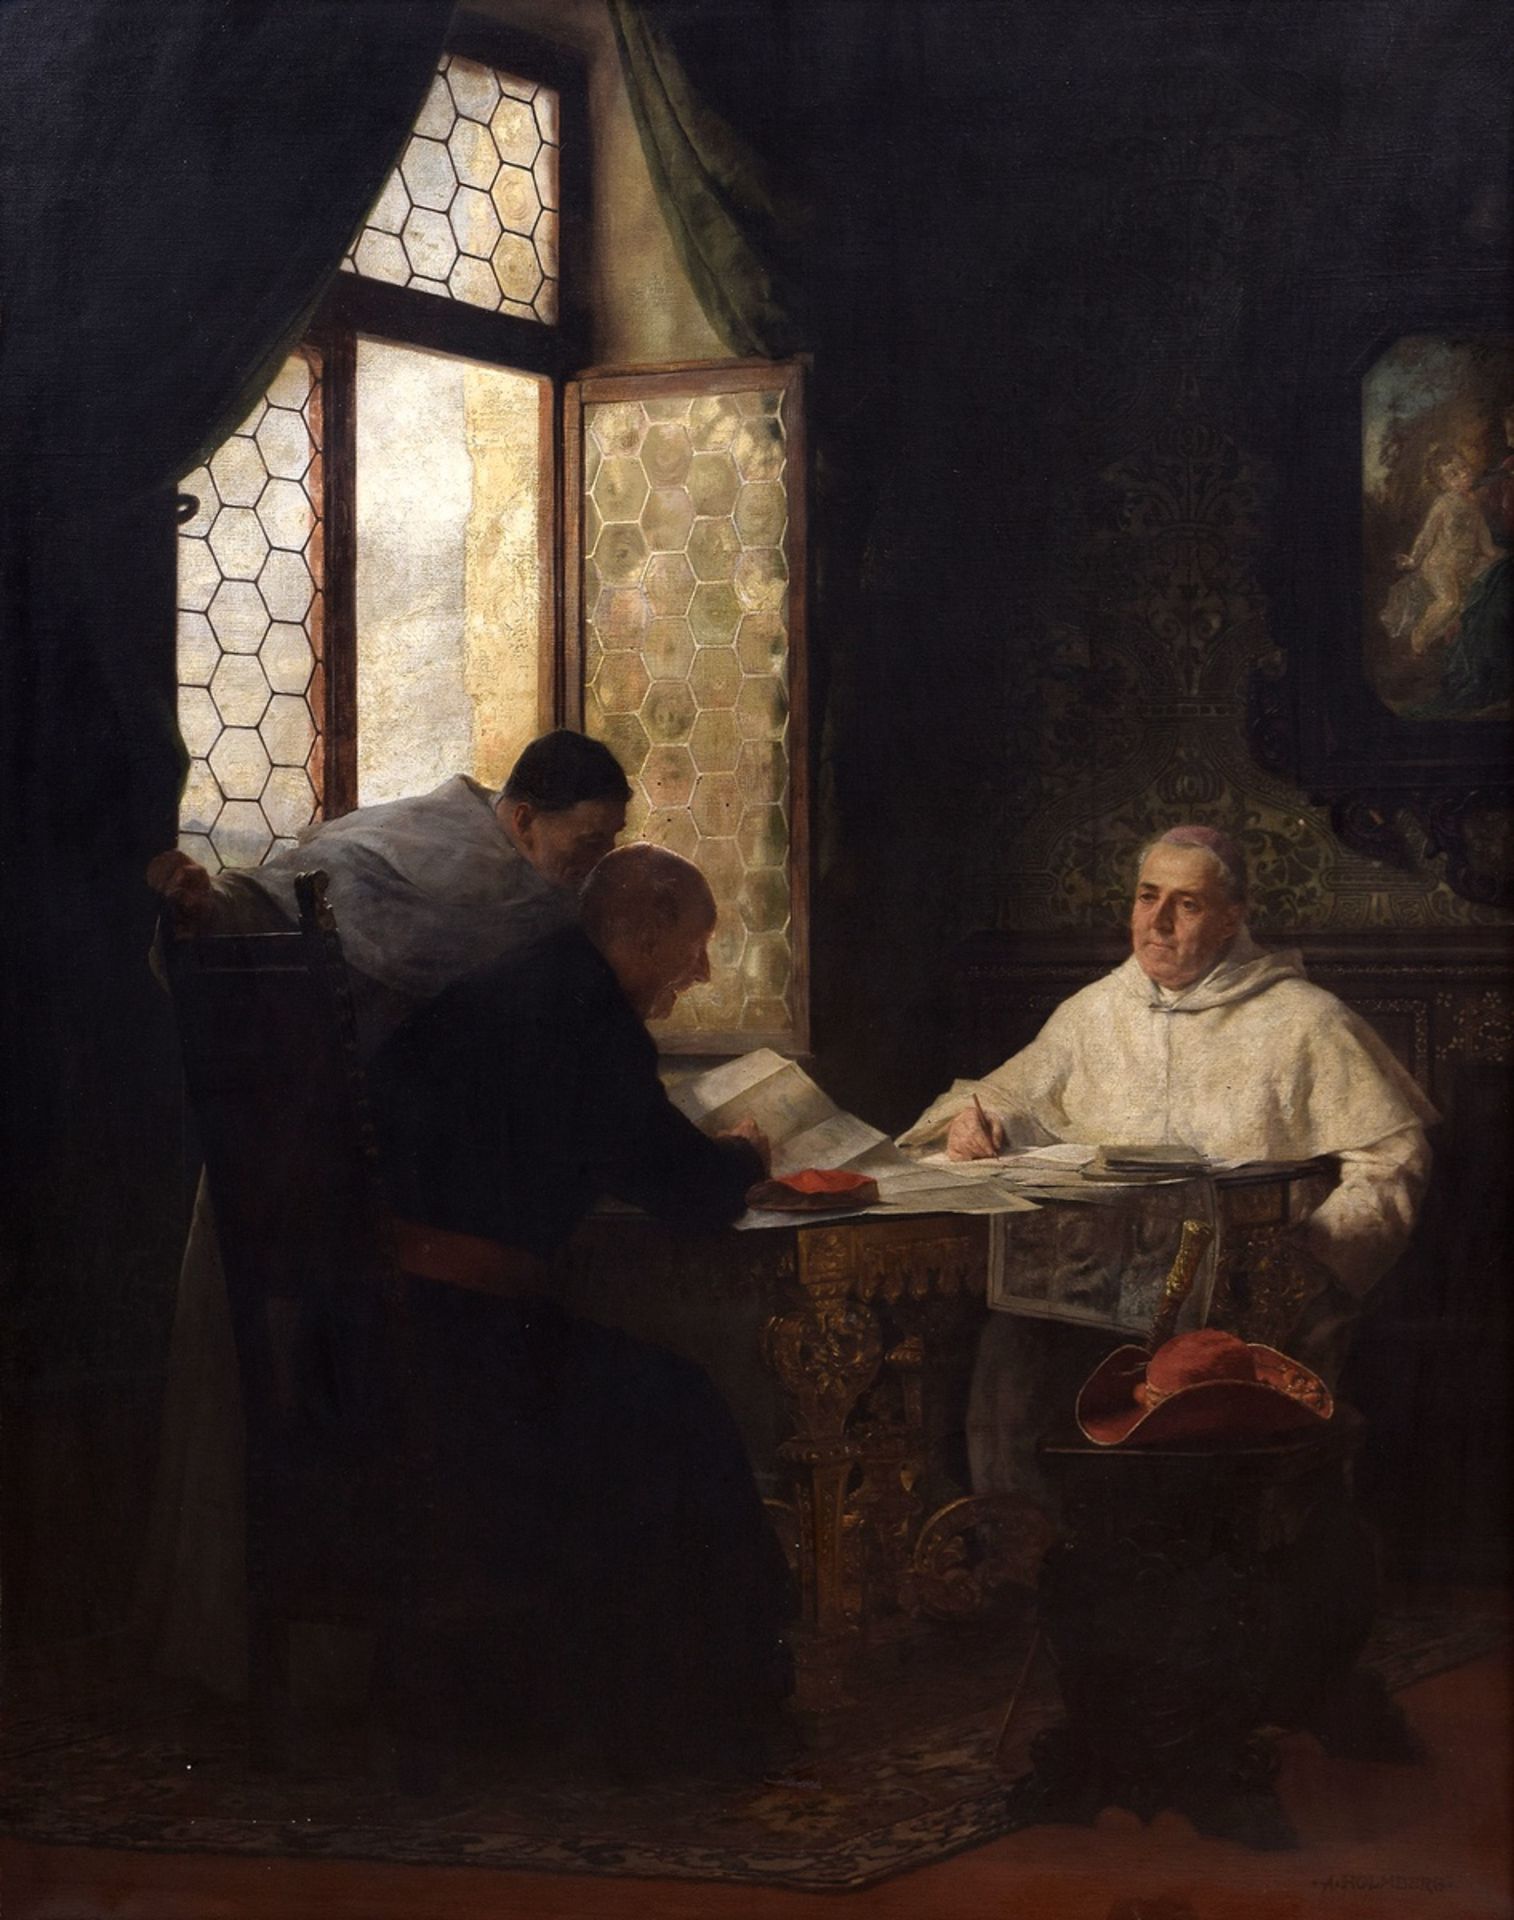 Holmberg, August (1851-1911) "Papal Dispute at the Window", oil/canvas, b.r. sign., magnificent fra